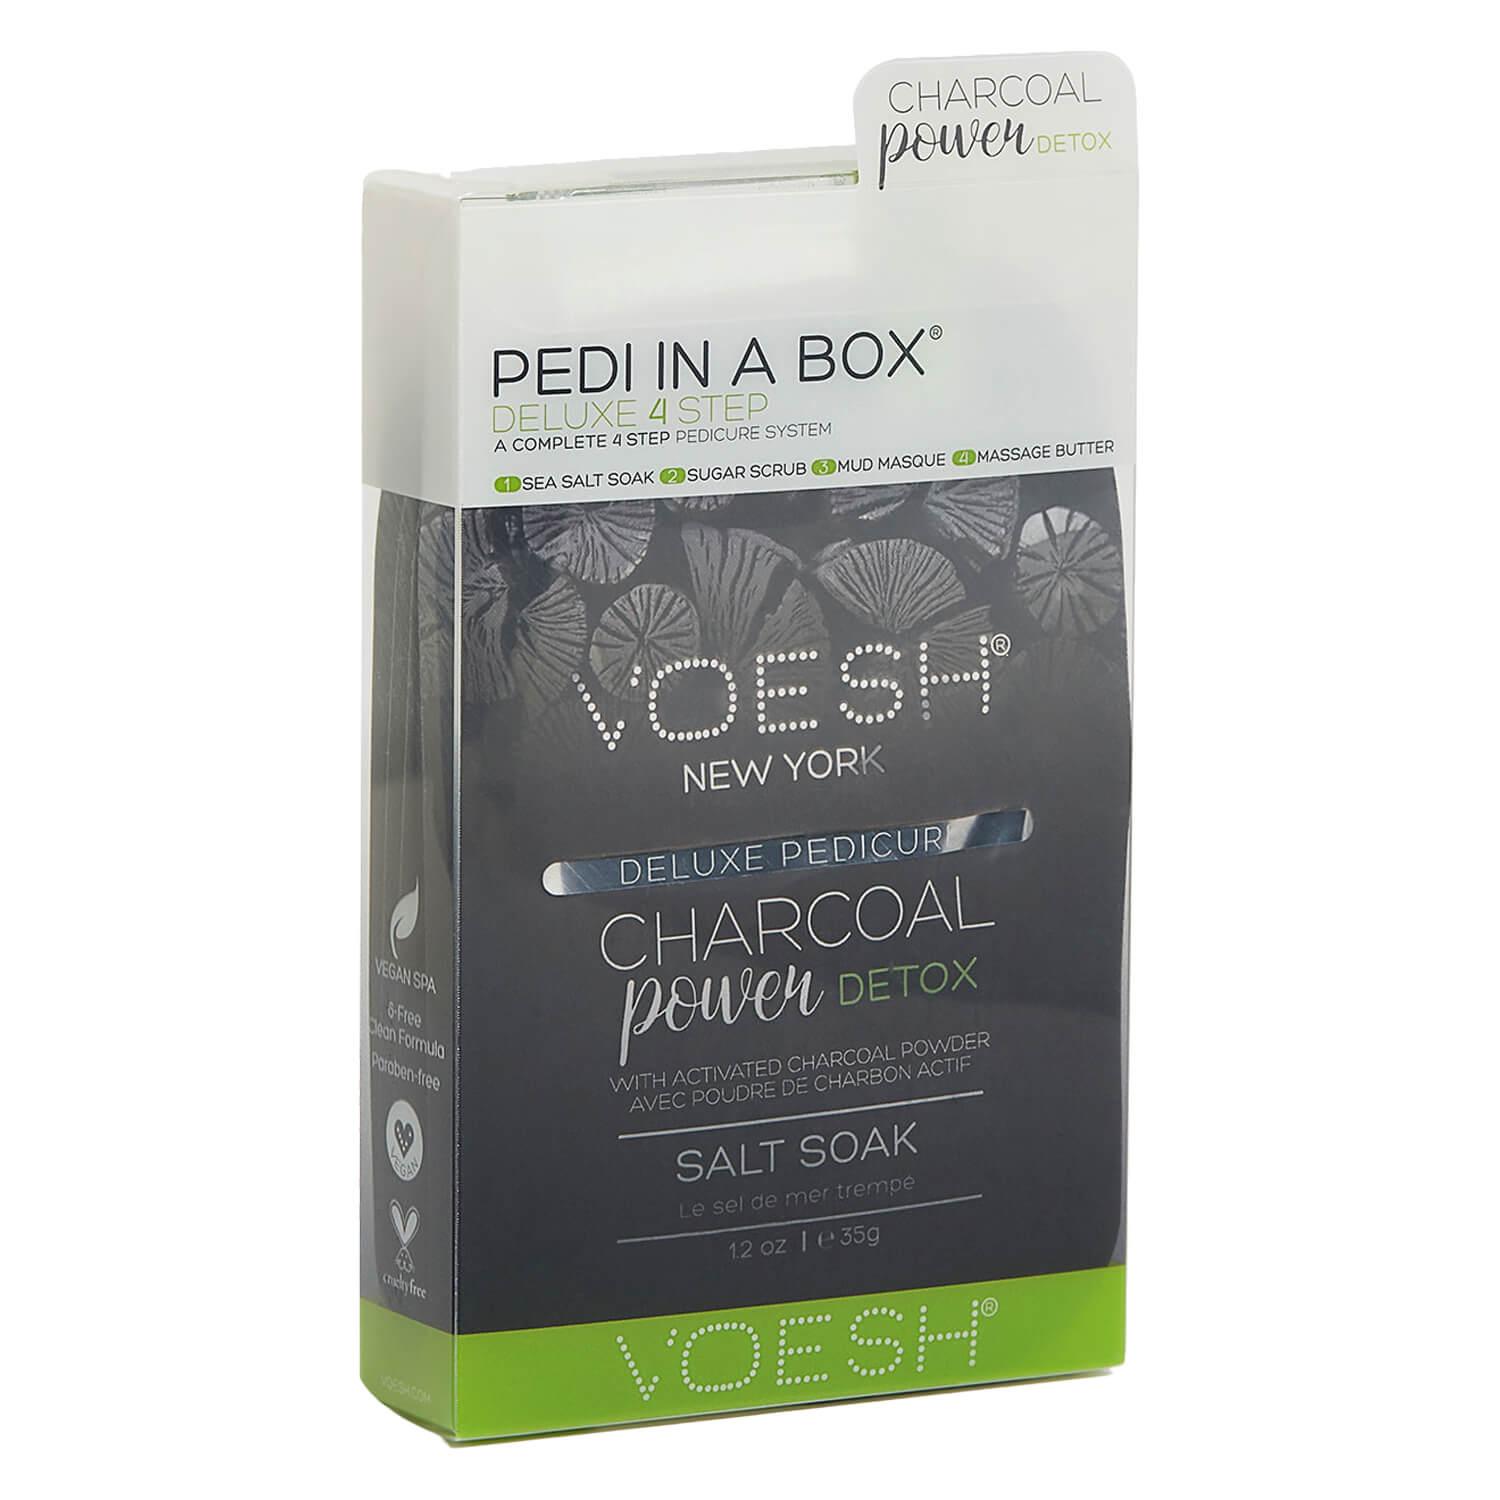 VOESH New York - Pedi In A Box 4 Step Charcoal Power